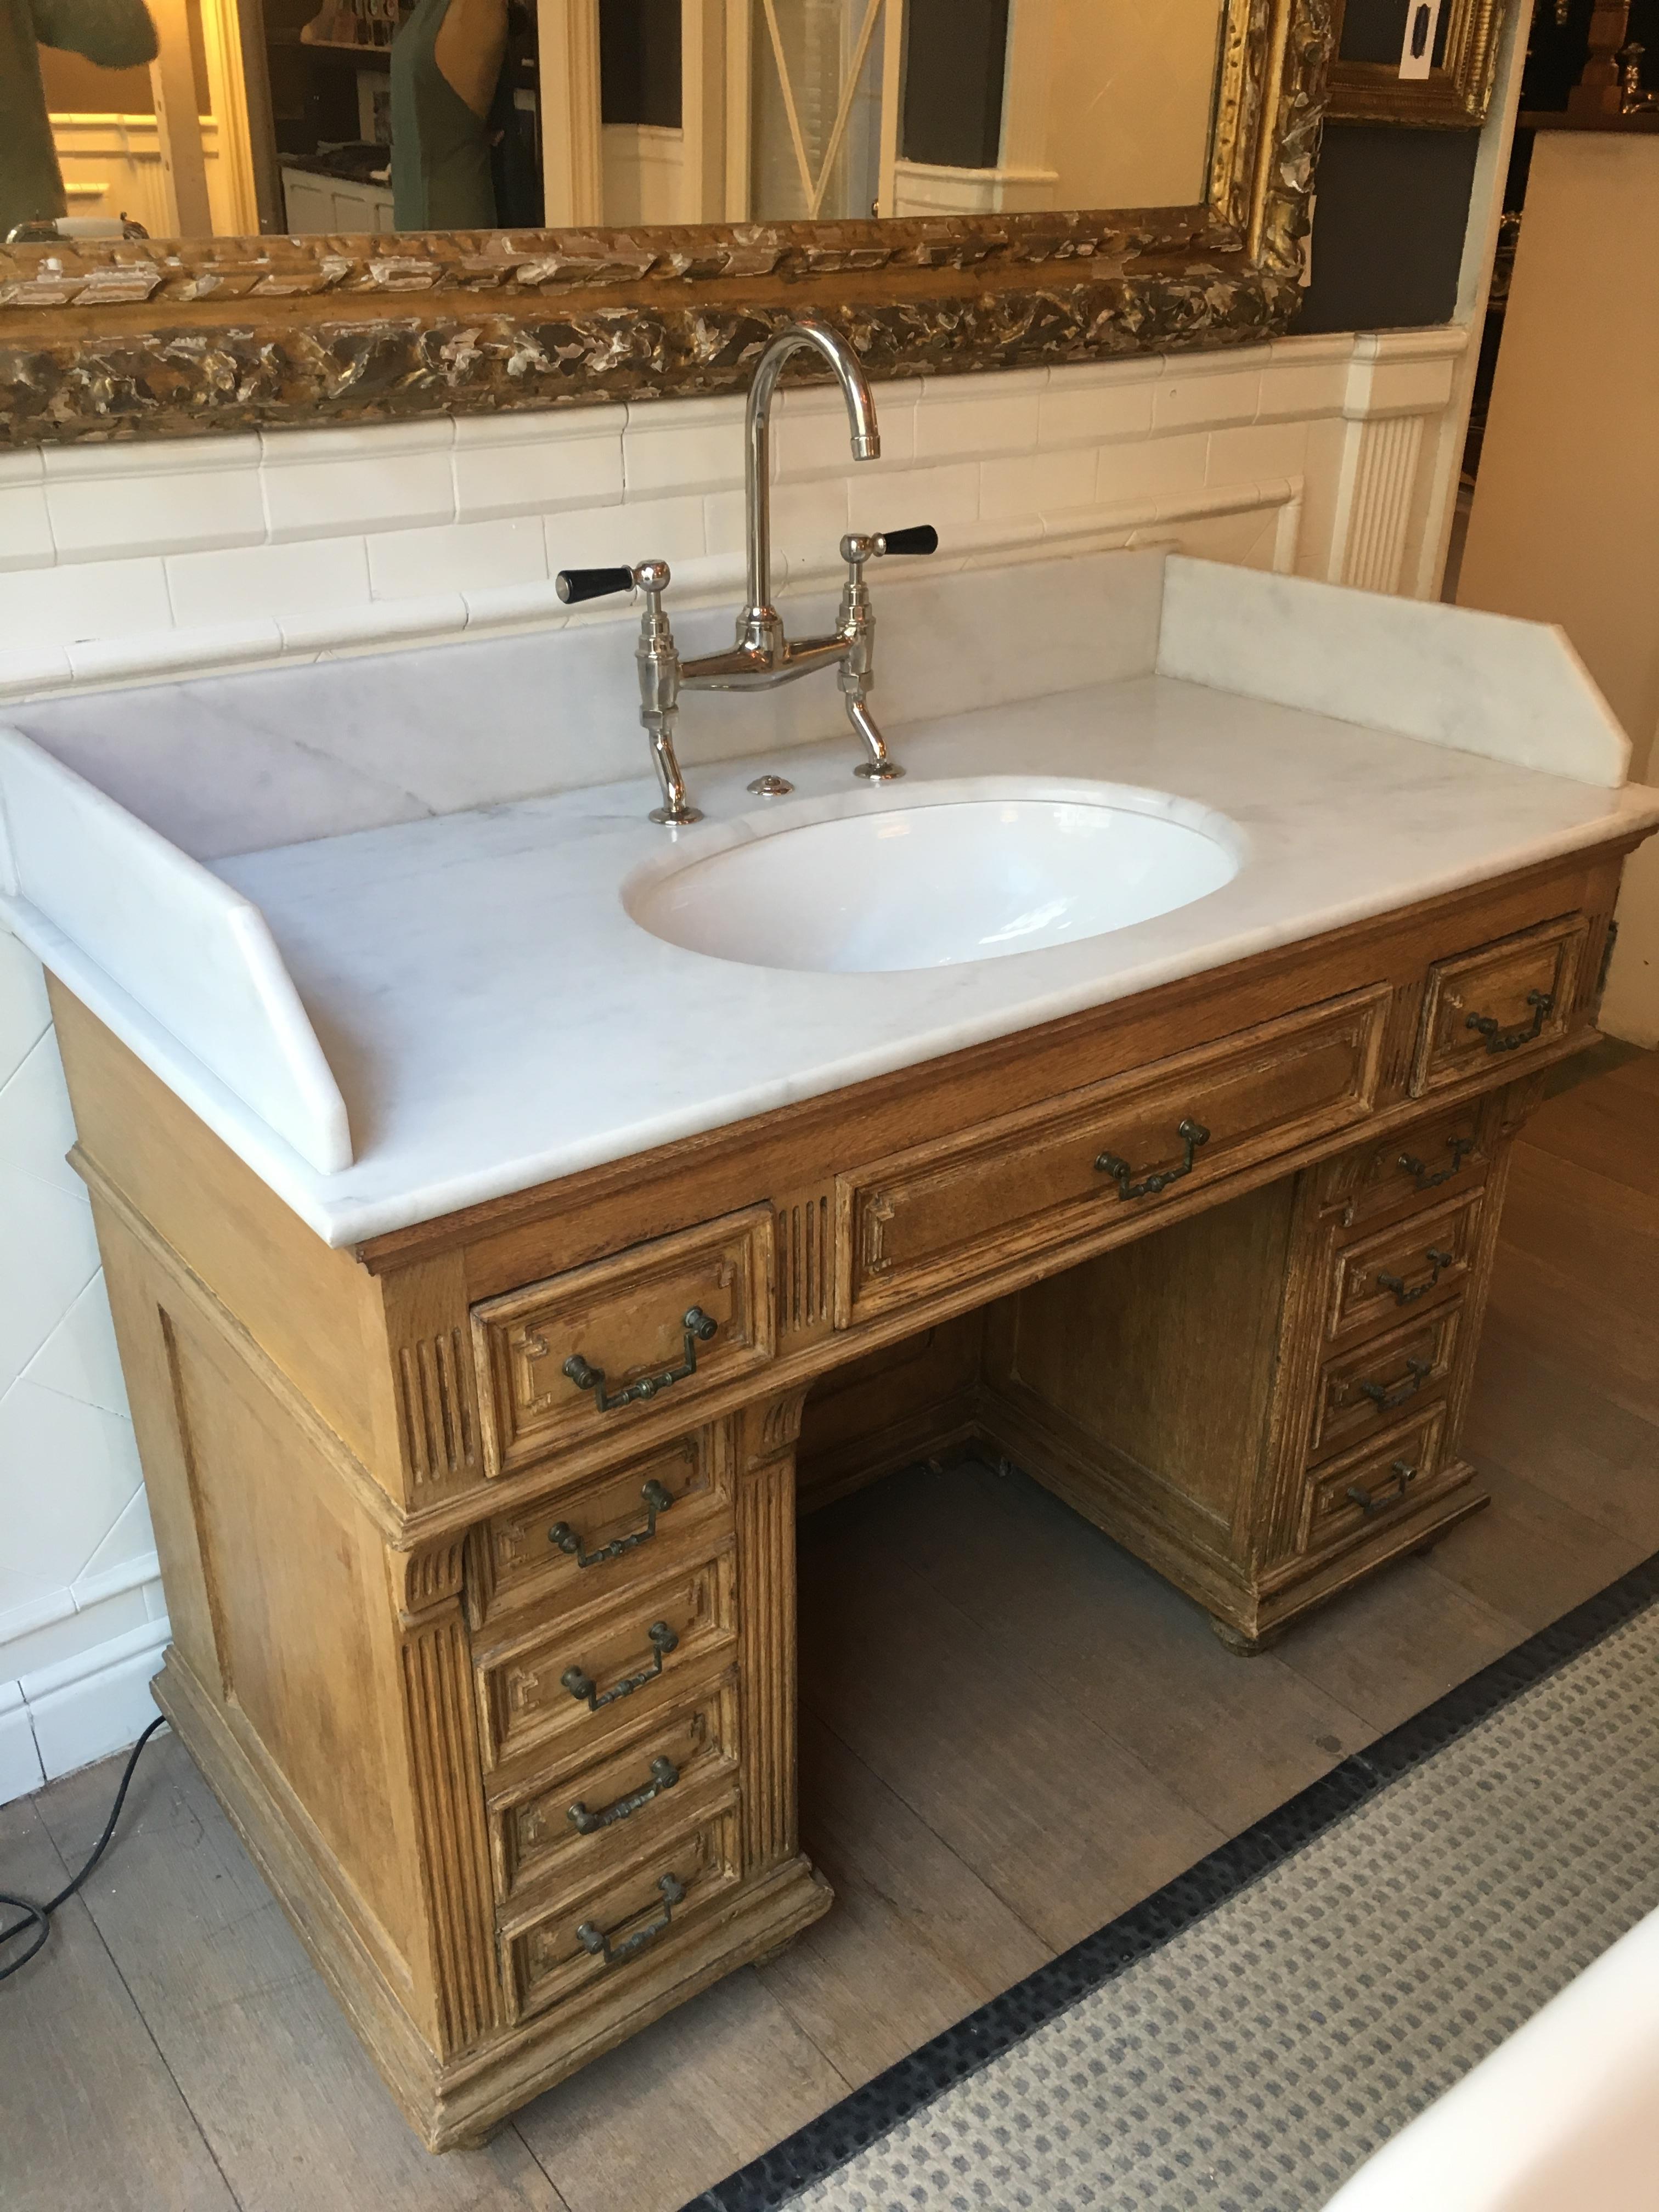 19th Century French Oak Cupboard Sink with Drawers and Carrara Marble Top, 1890s (Französisch)